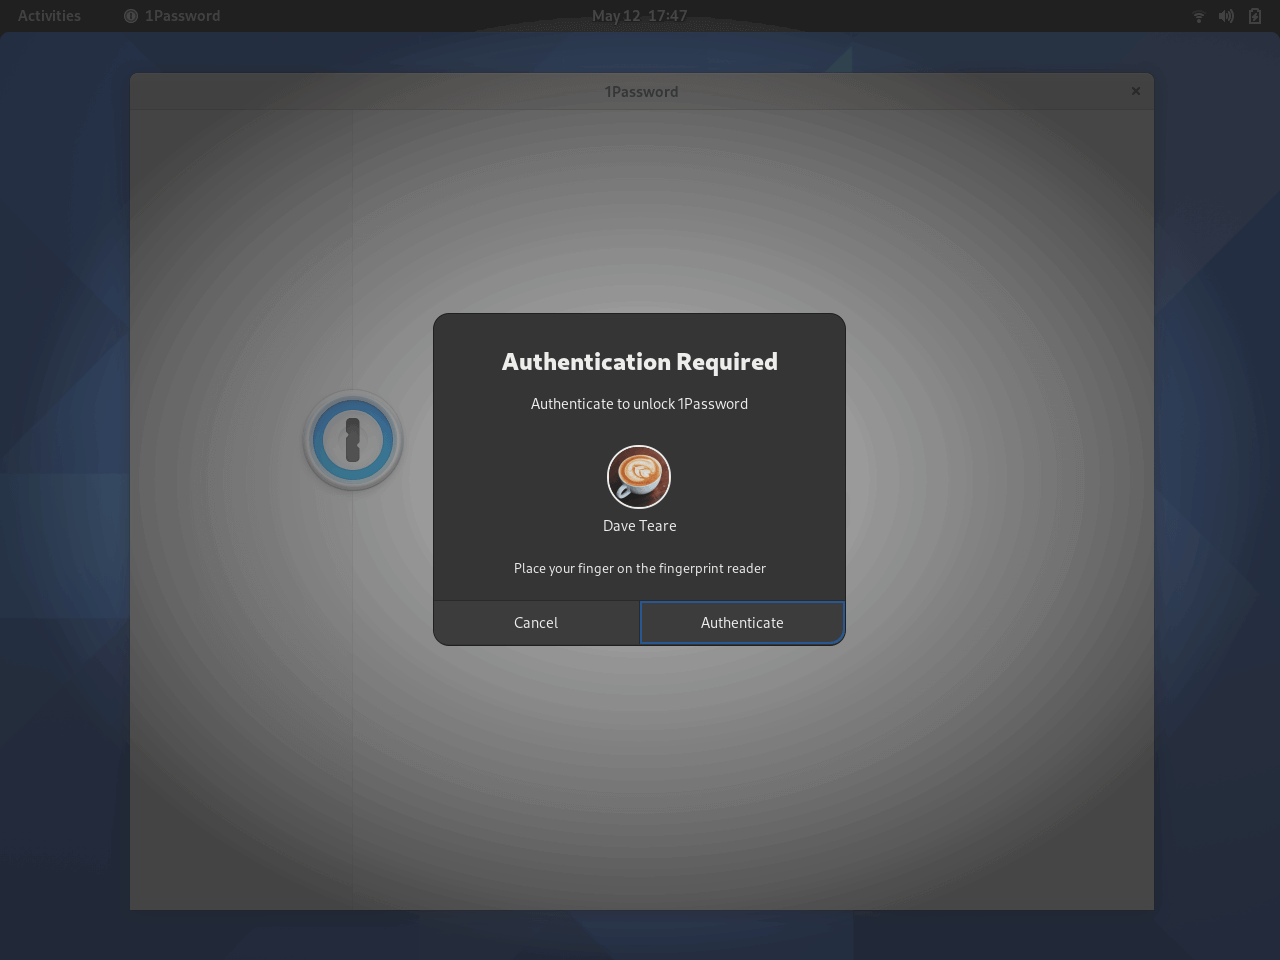 1Password authentication prompt running in Gnome desktop environment